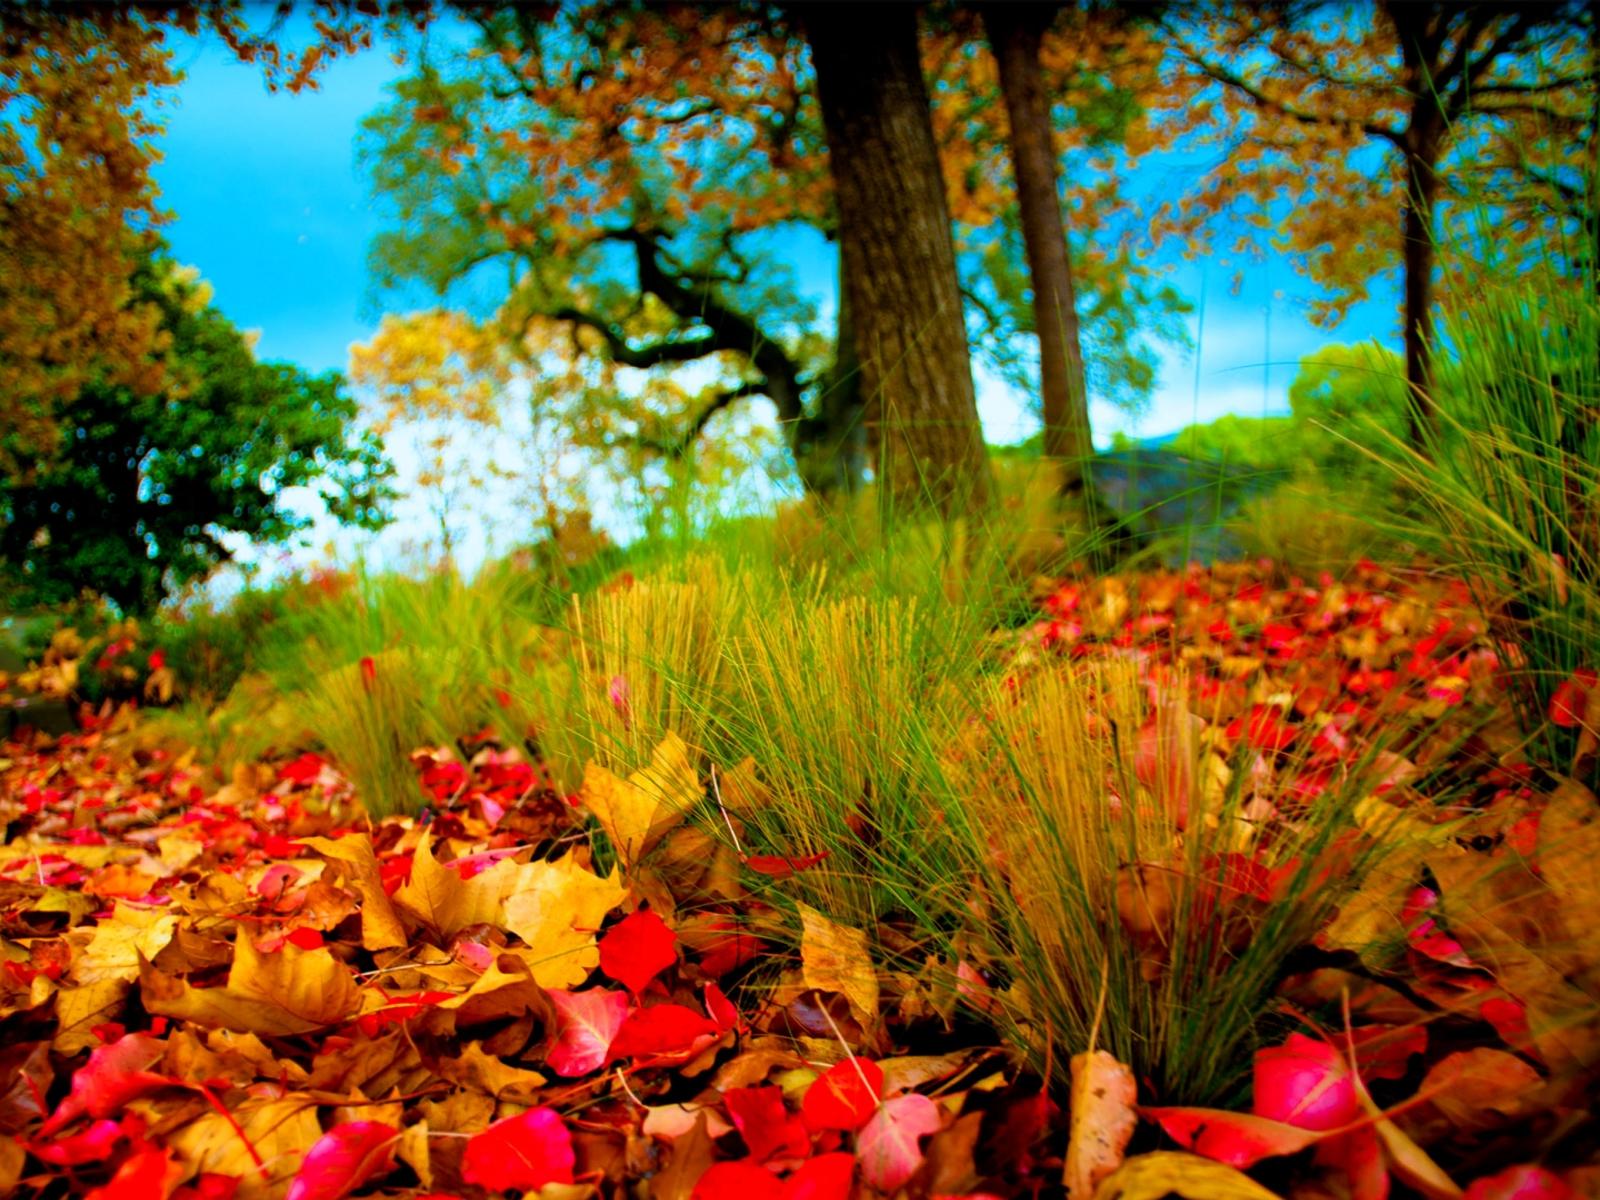 Autumn leaves on the field - beautiful nature wallpaper